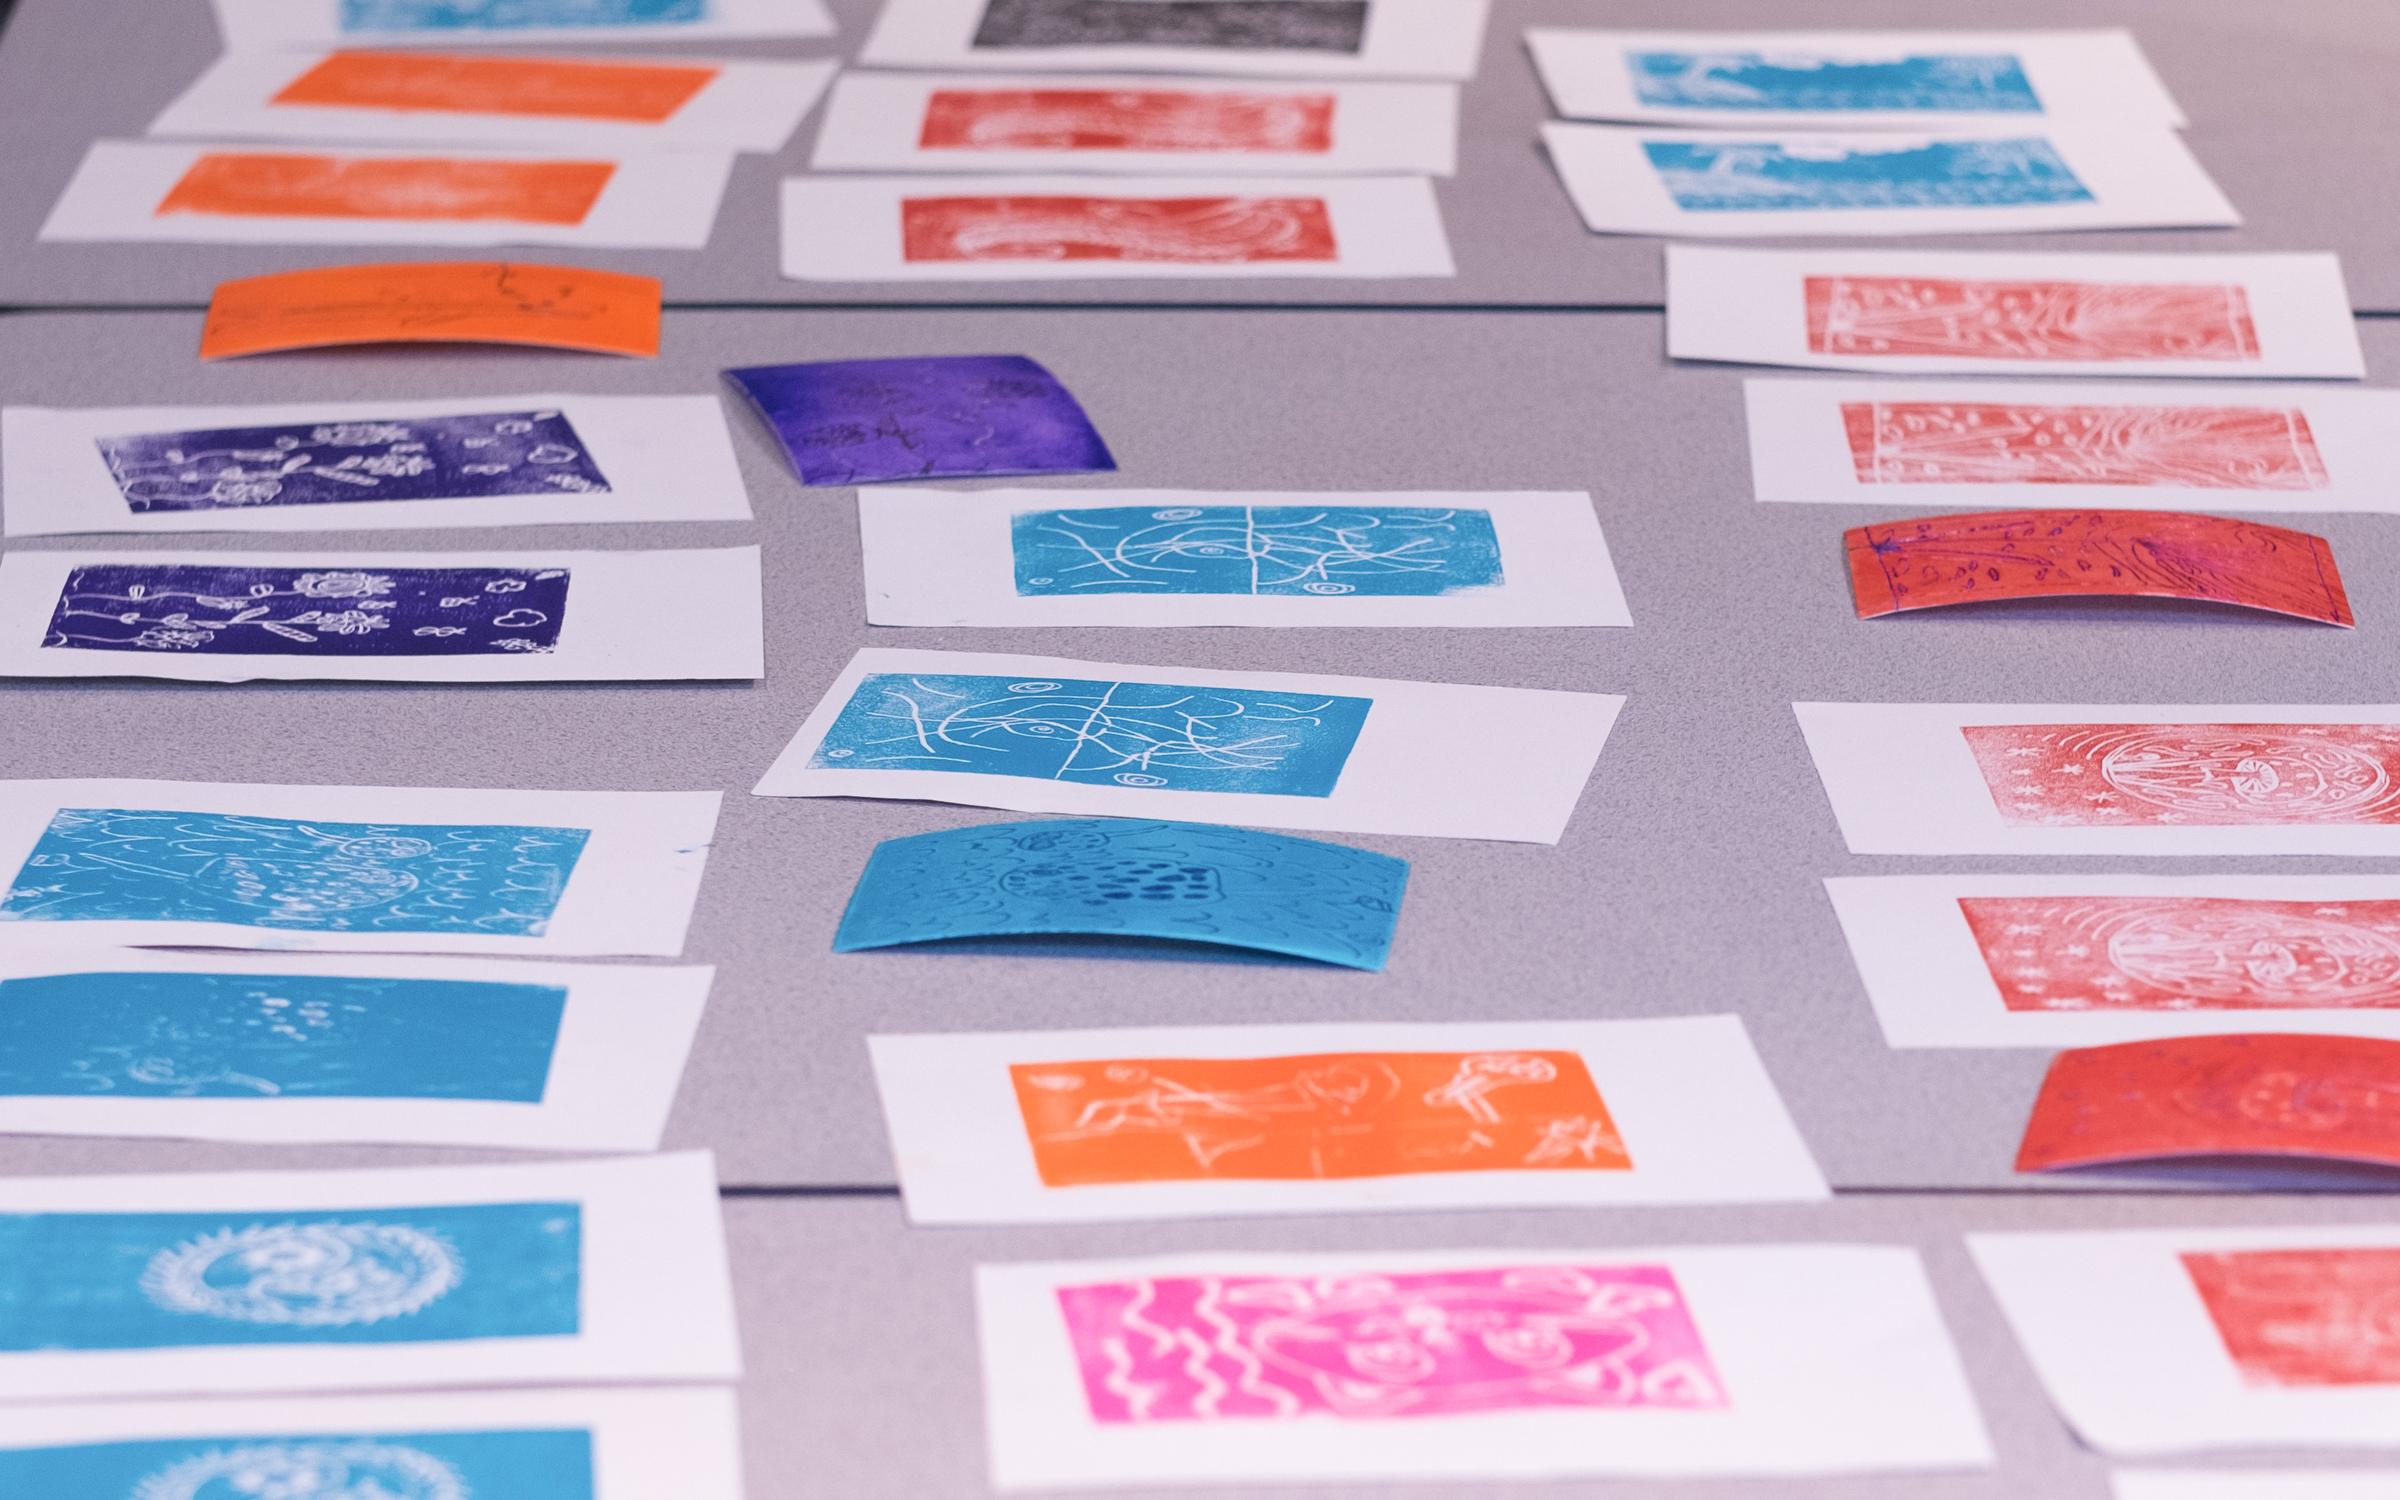 Hand printed Holiday cards at the Utah Museum of Fine Arts